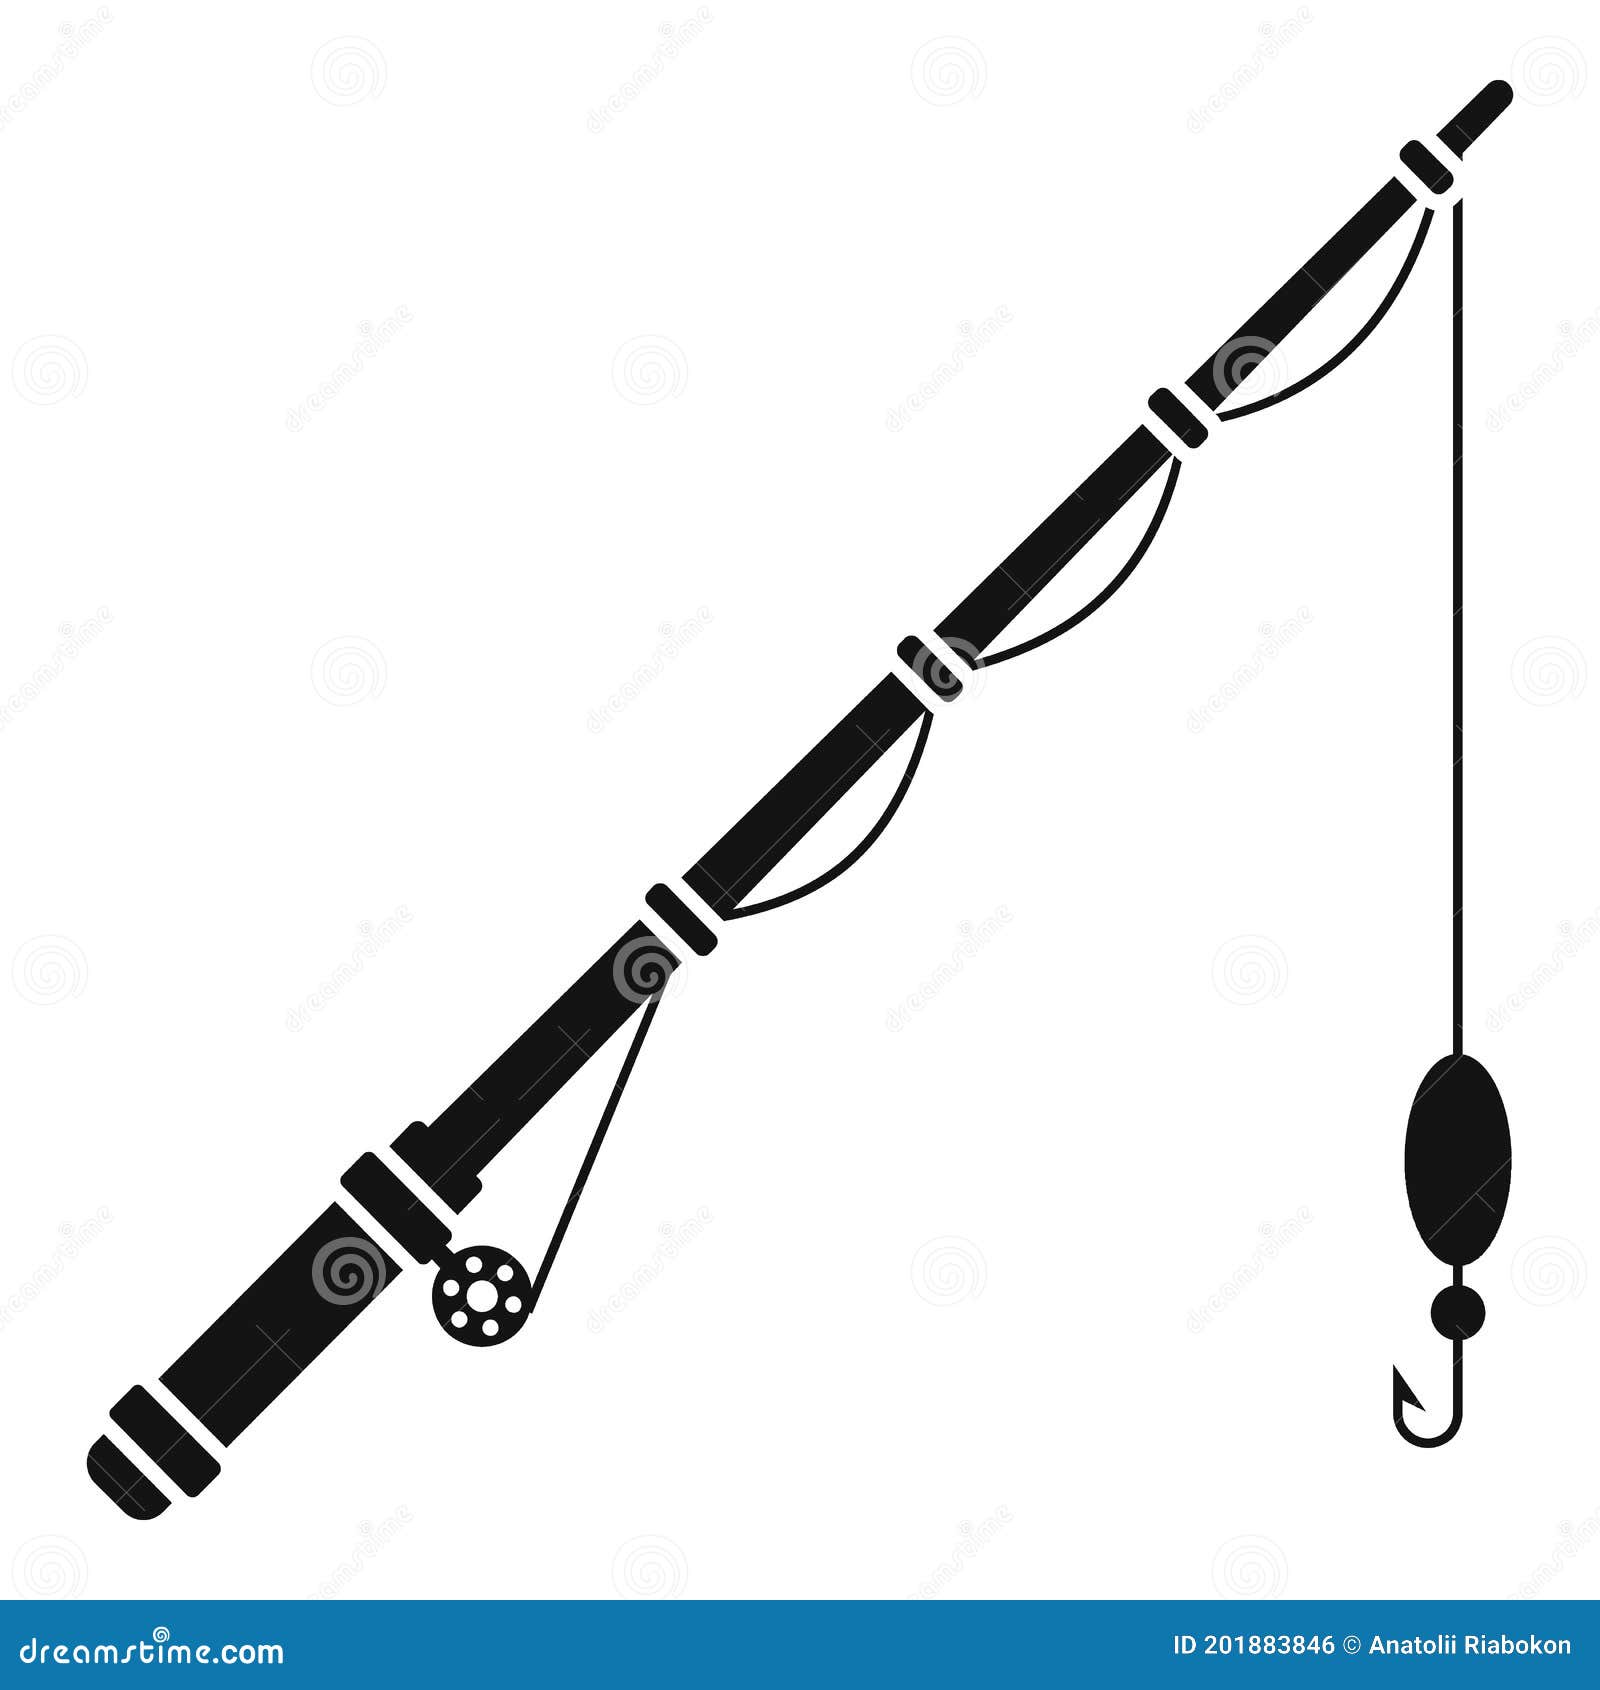 https://thumbs.dreamstime.com/z/fishing-rod-icon-simple-style-illustration-vector-web-design-isolated-white-background-201883846.jpg